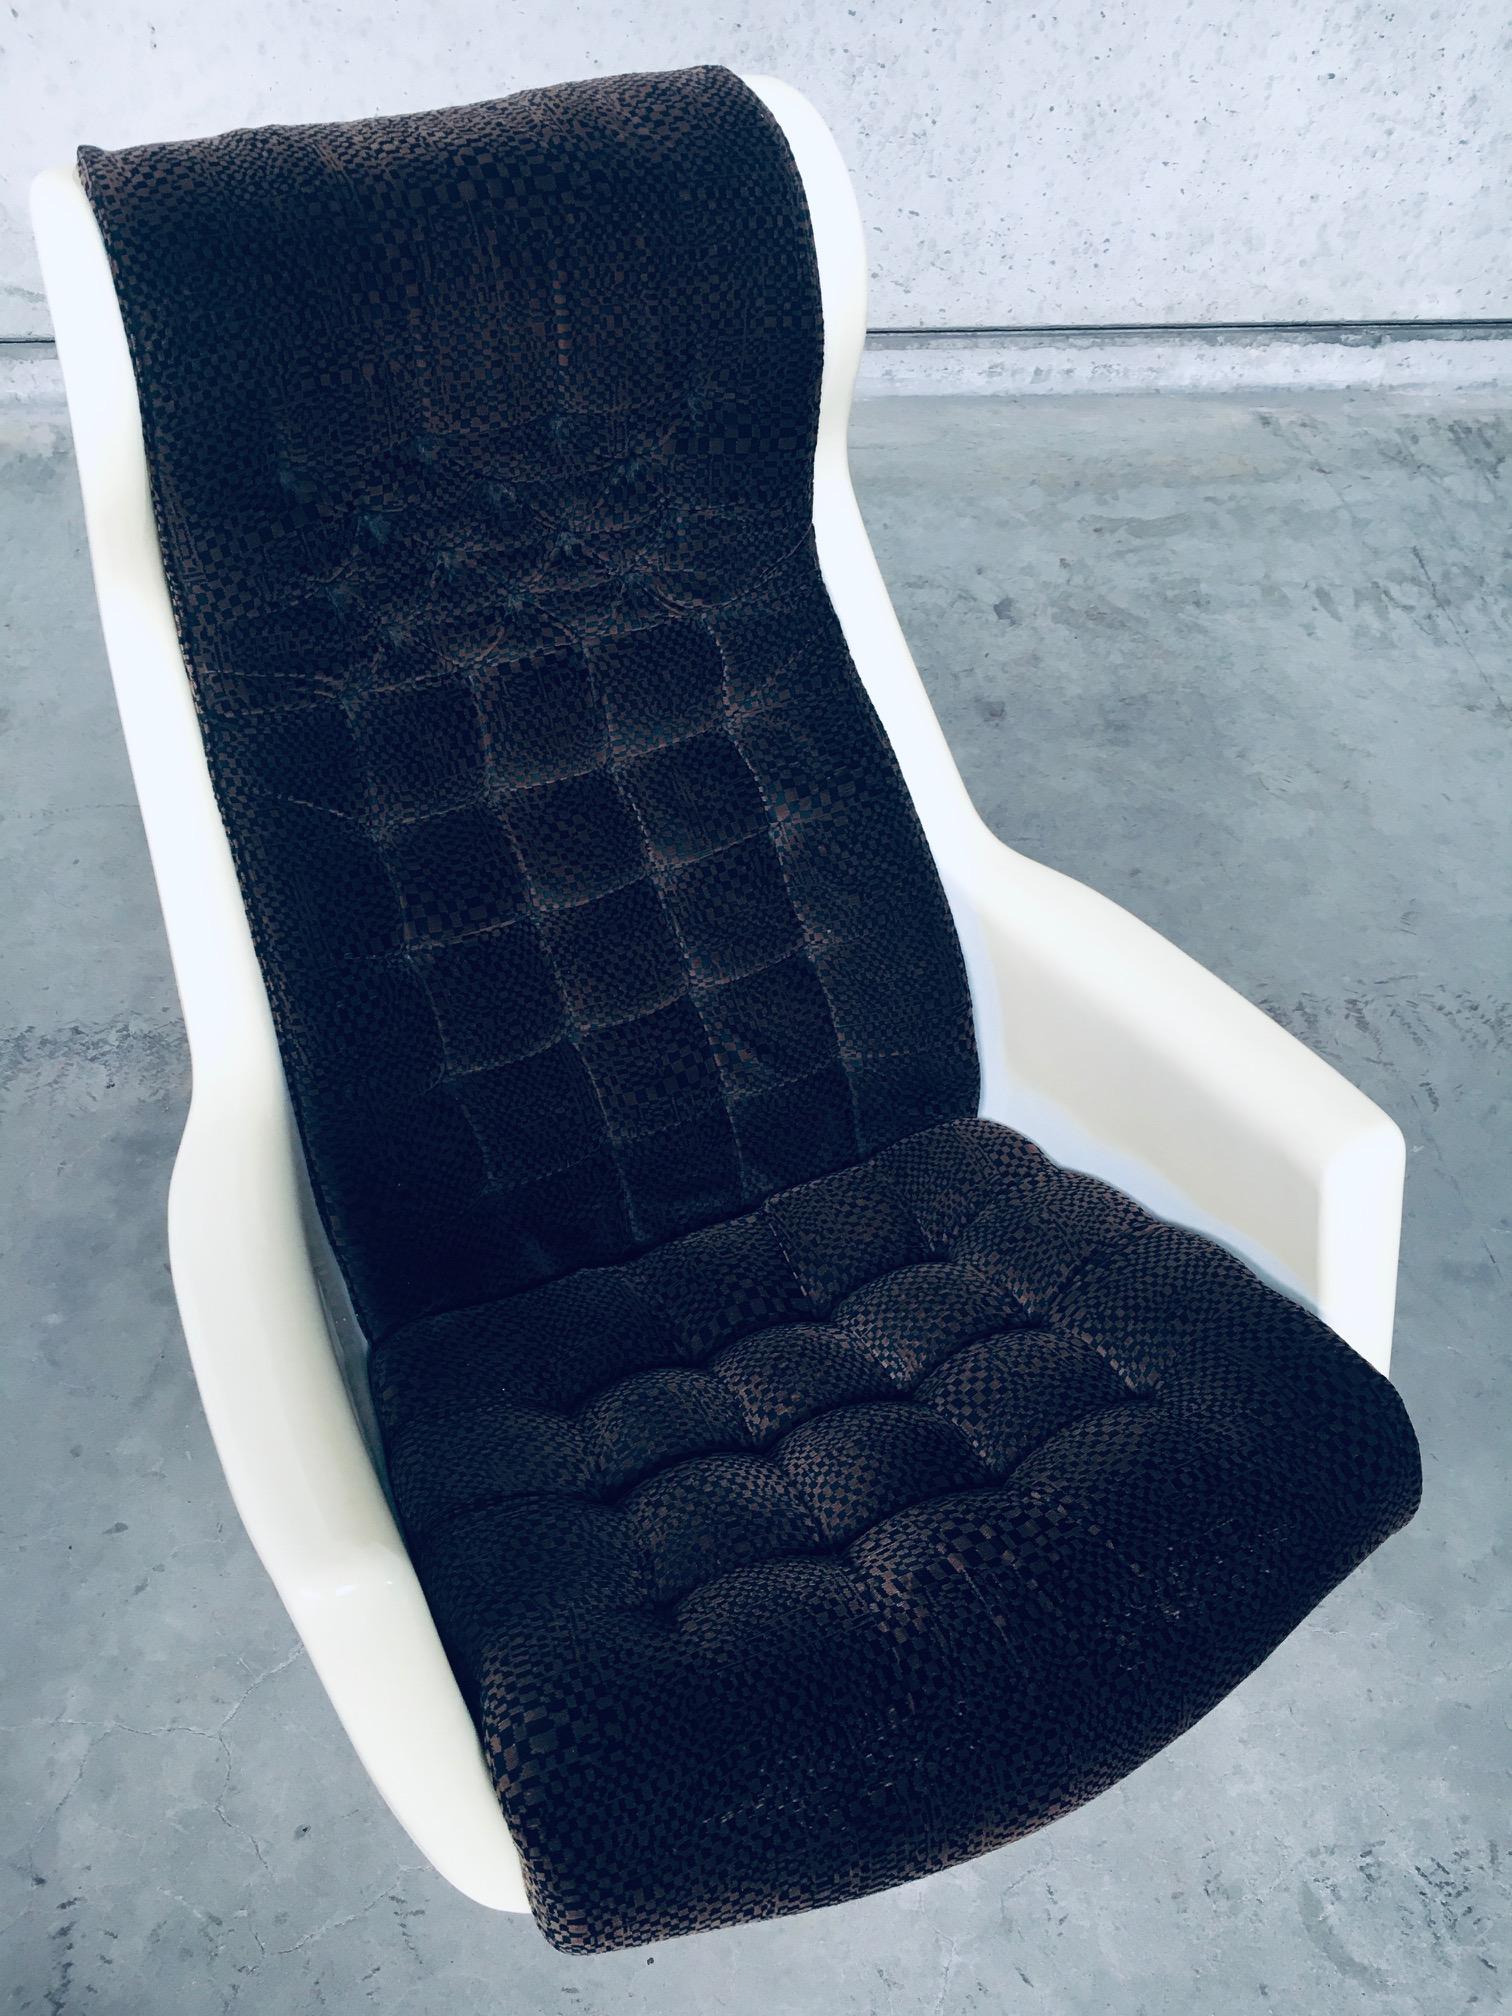 Midcentury Modern 'Galaxy' Lounge Chair by Alf Svensson for Dux, Denmark 1960's 4